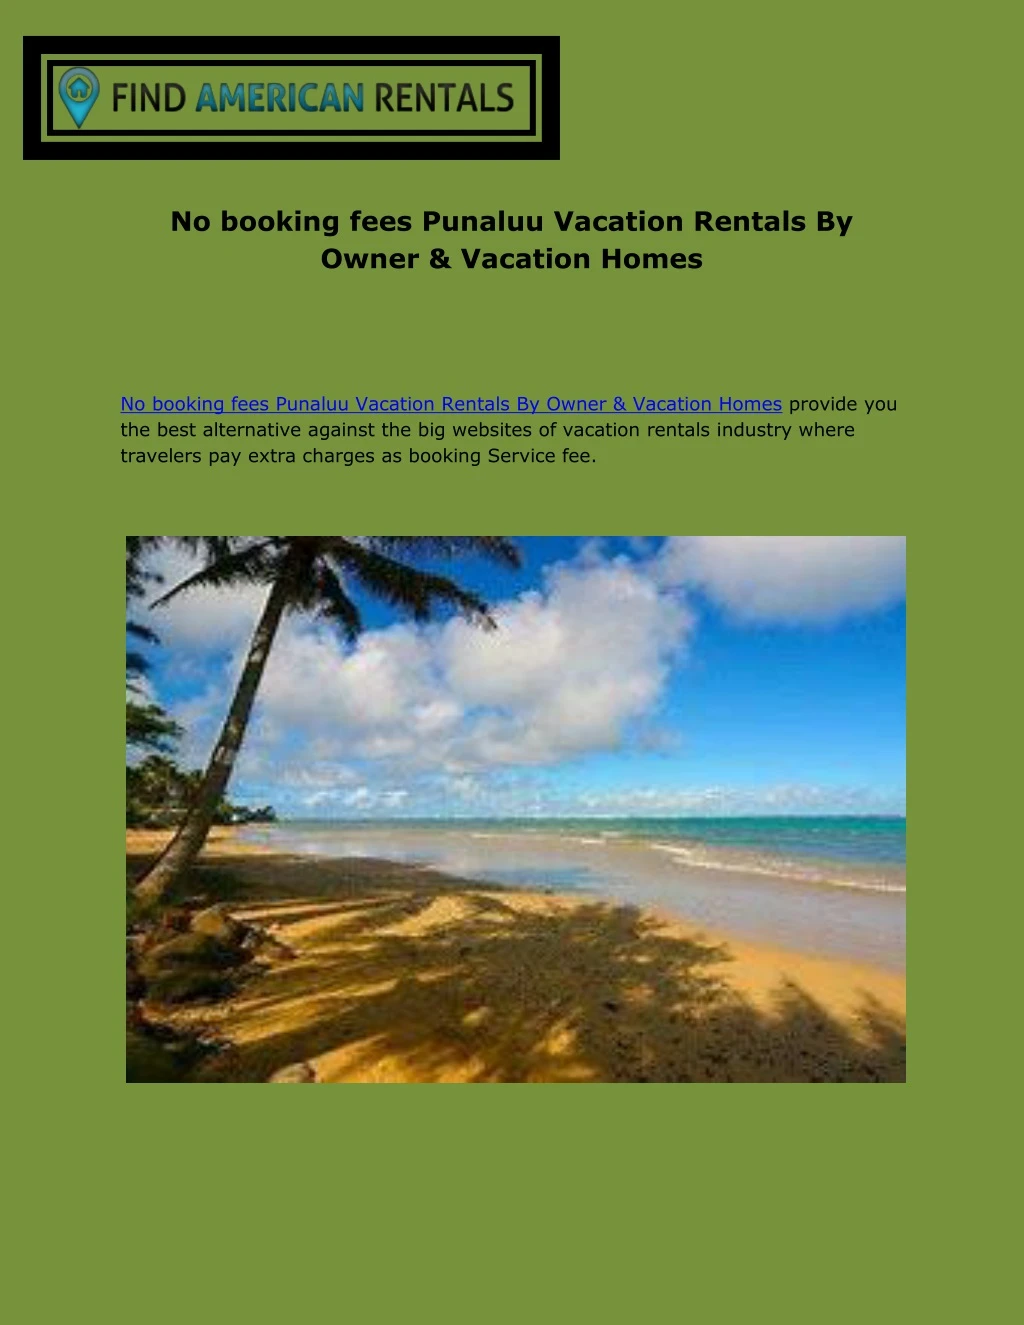 no booking fees punaluu vacation rentals by owner